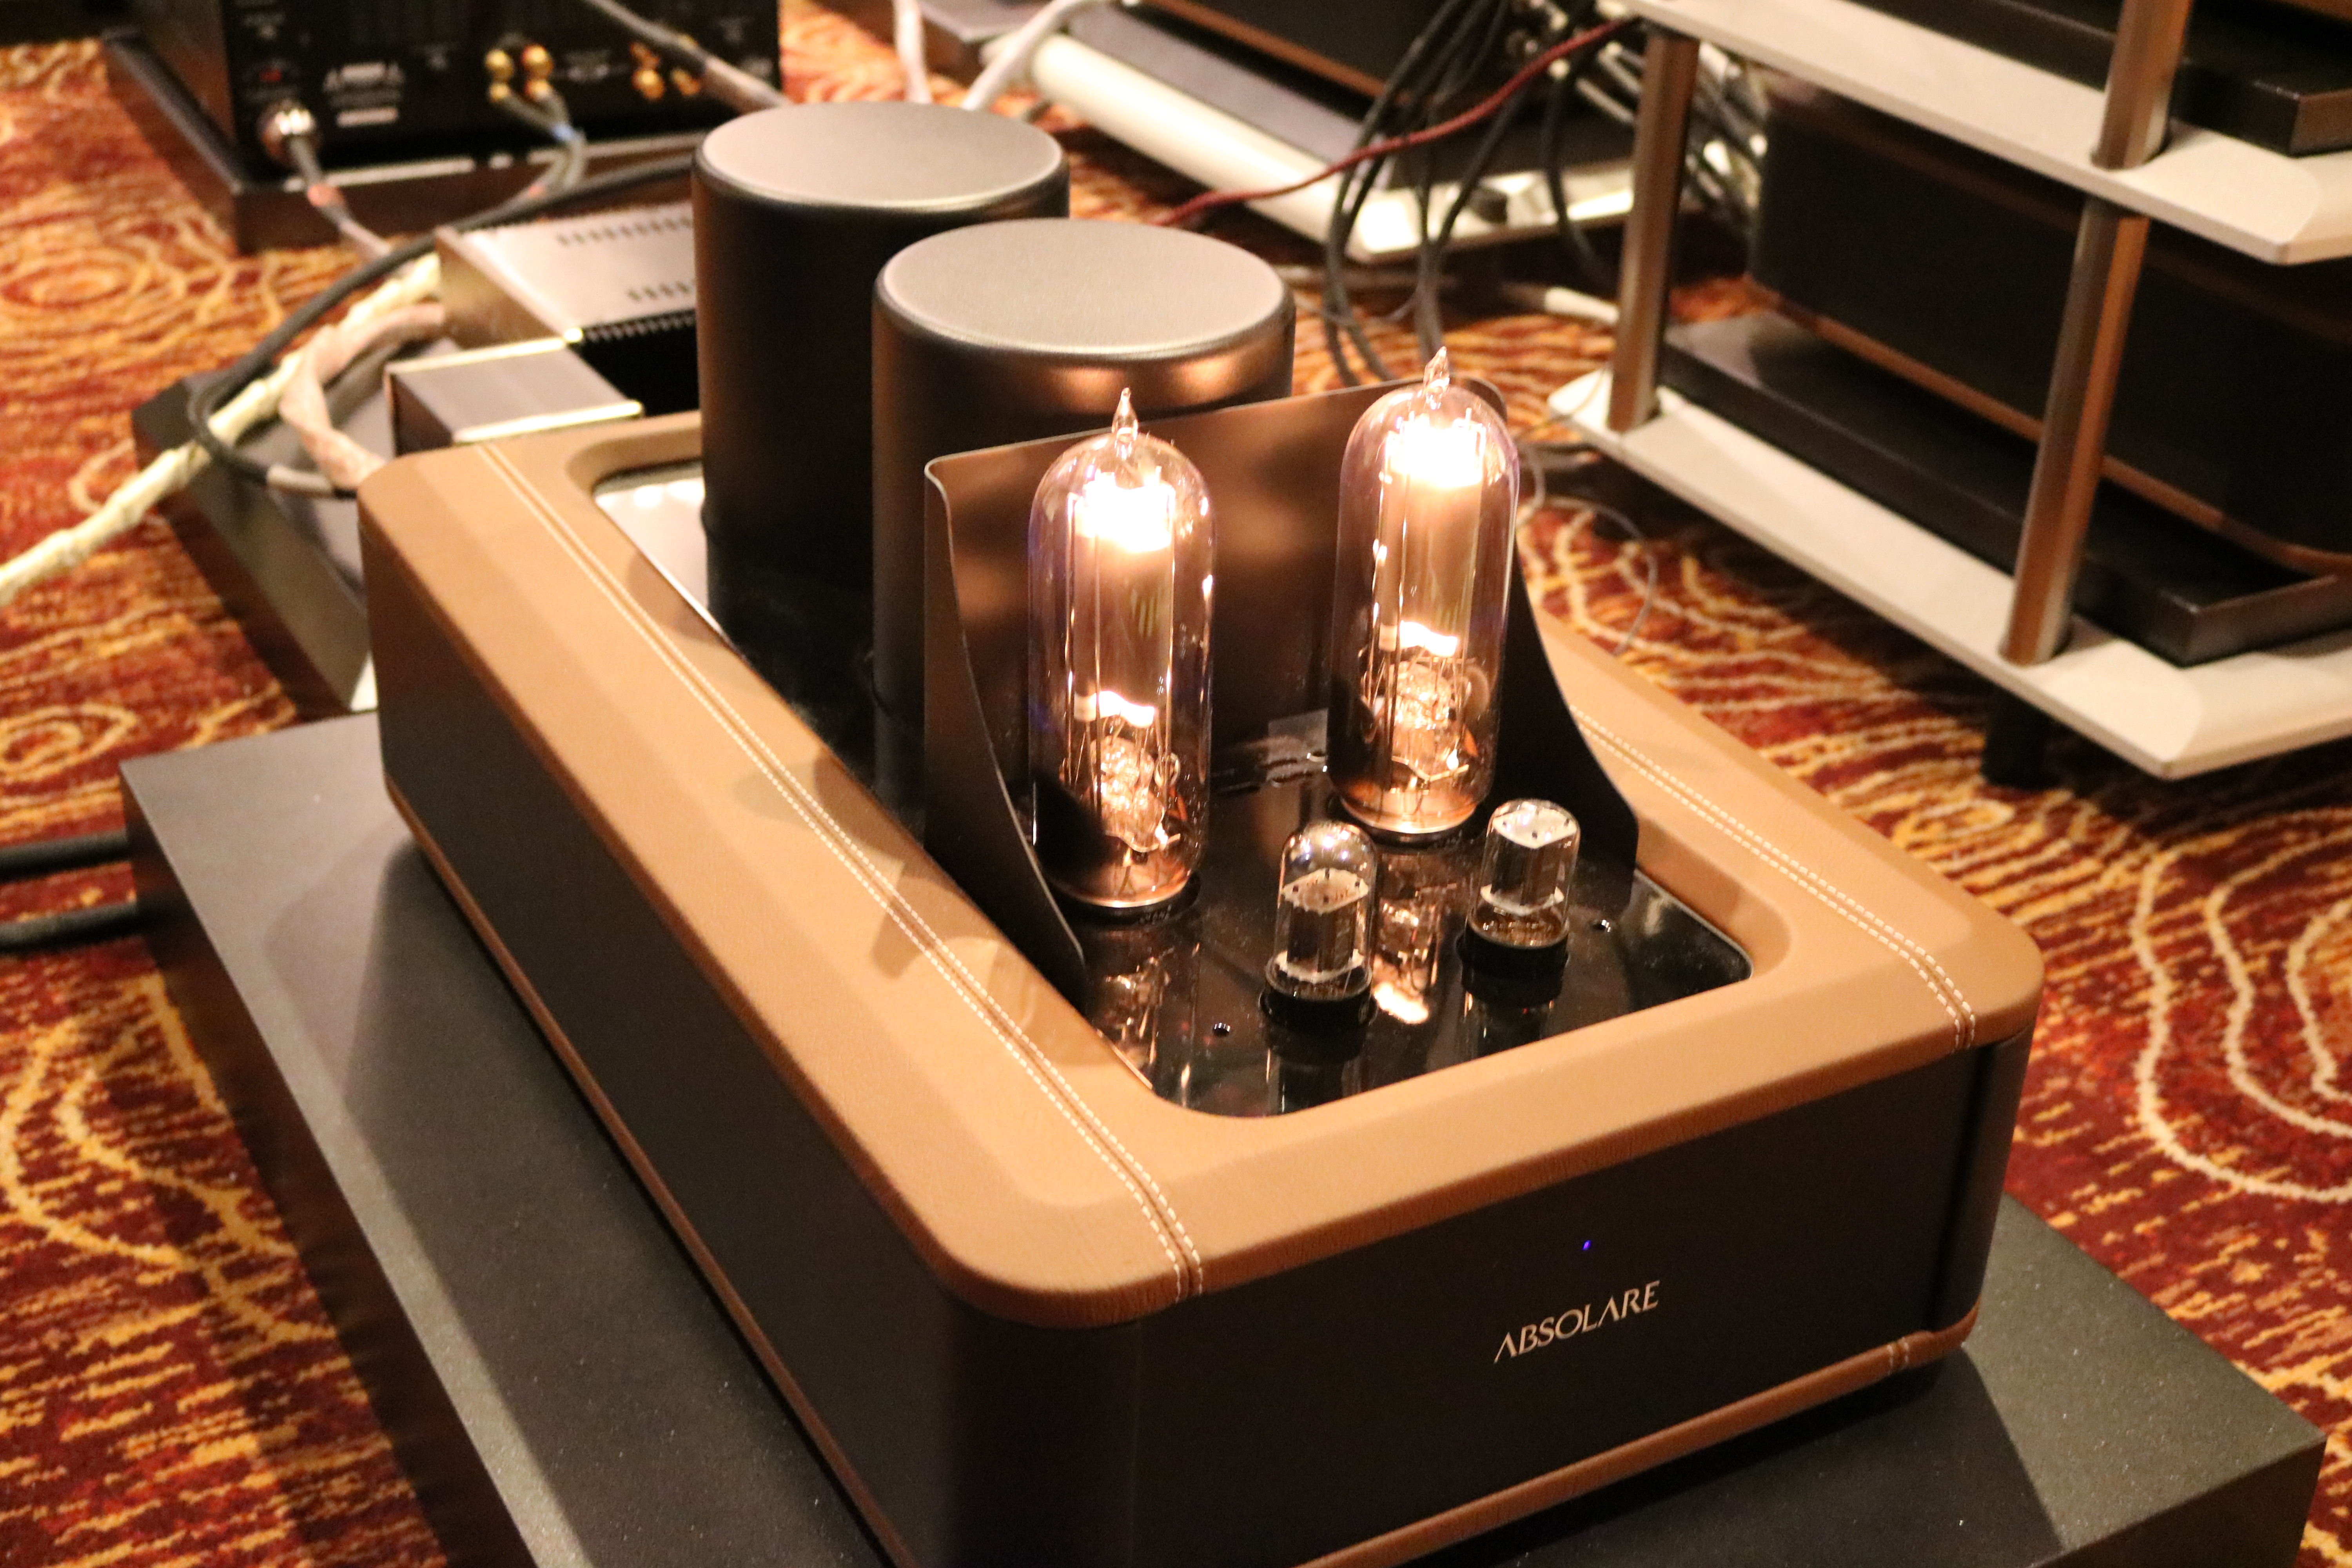 Absolare tube amplifier